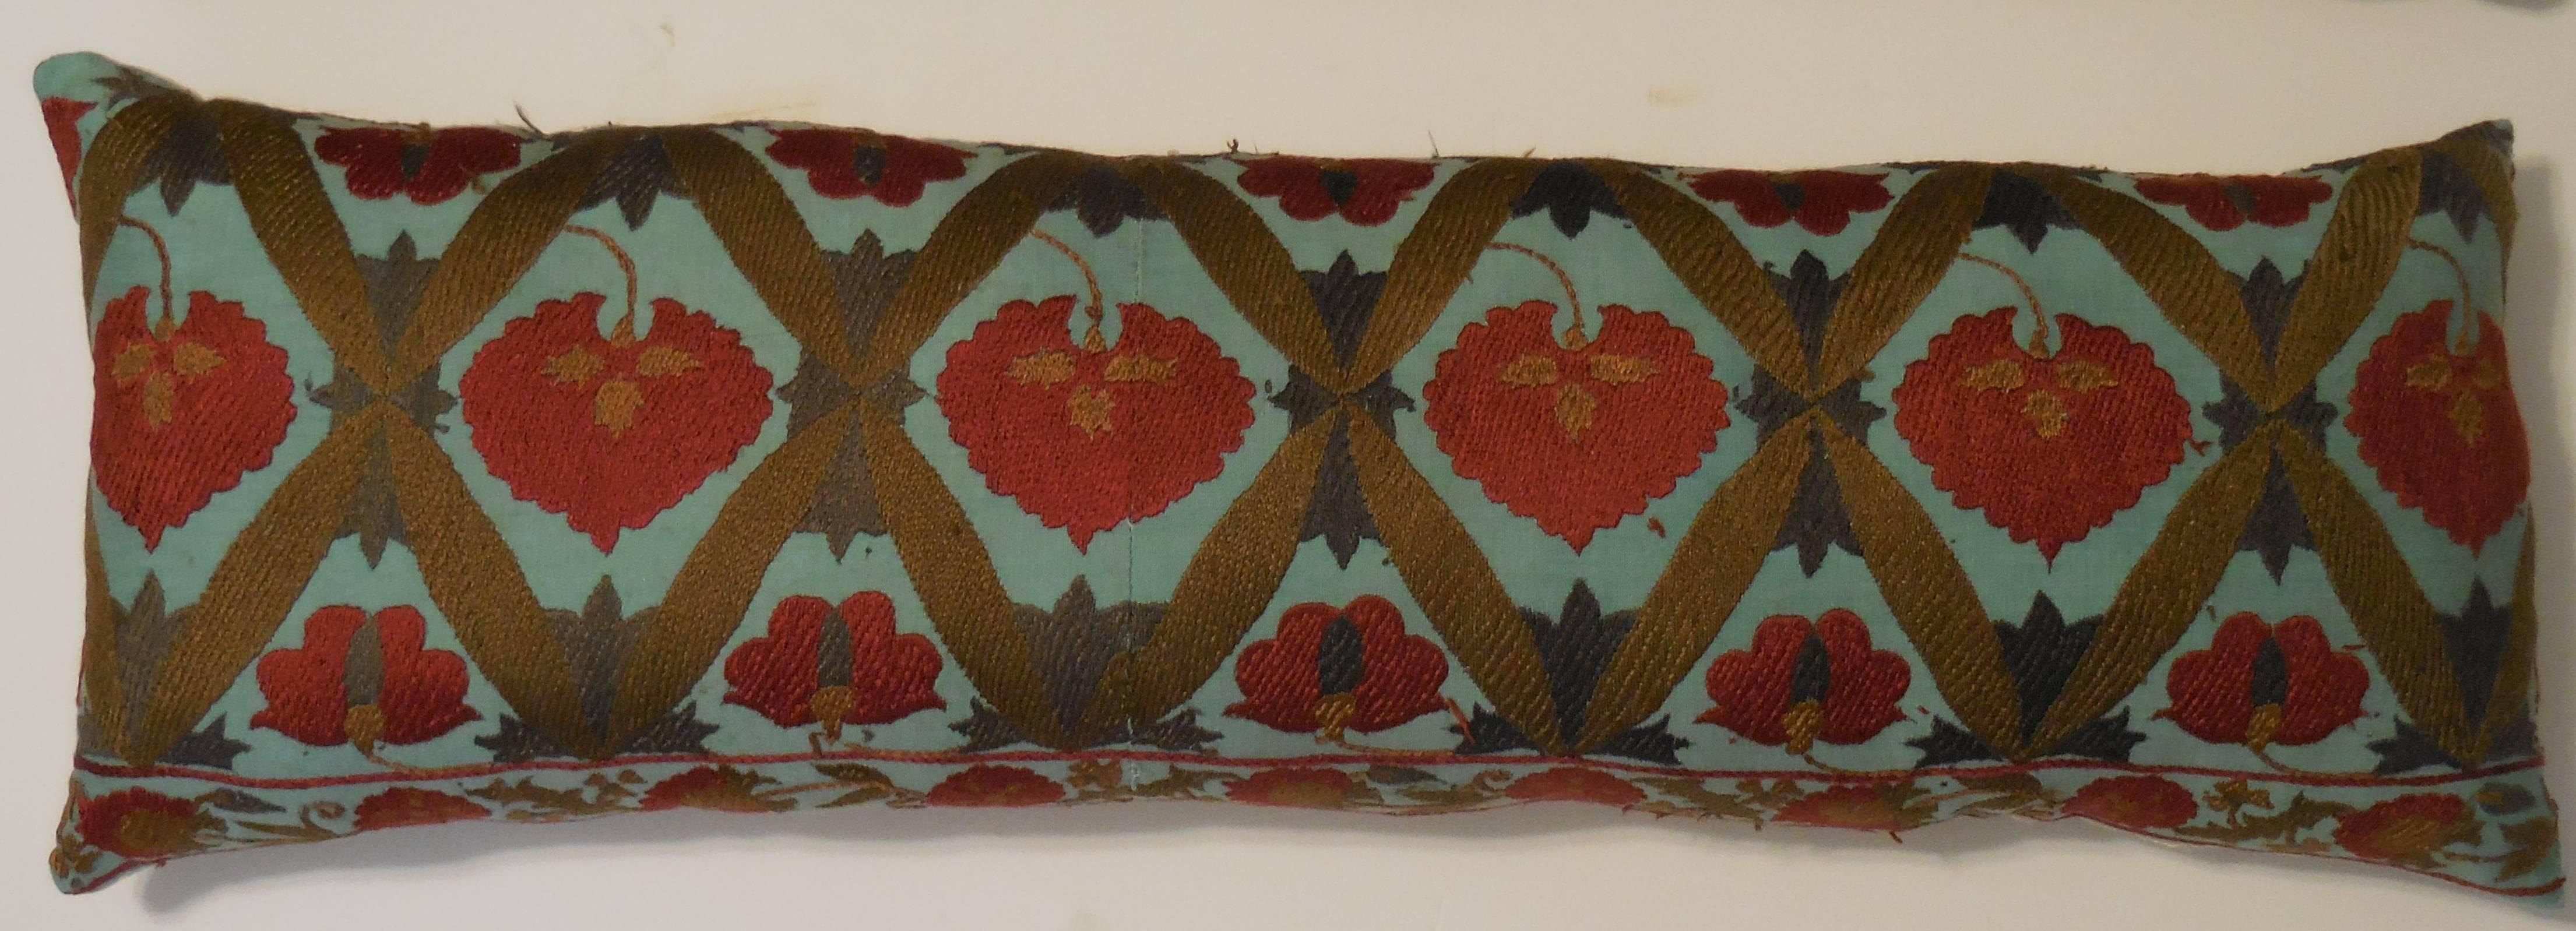 20th Century Pair of Suzani Embroidery Pillows